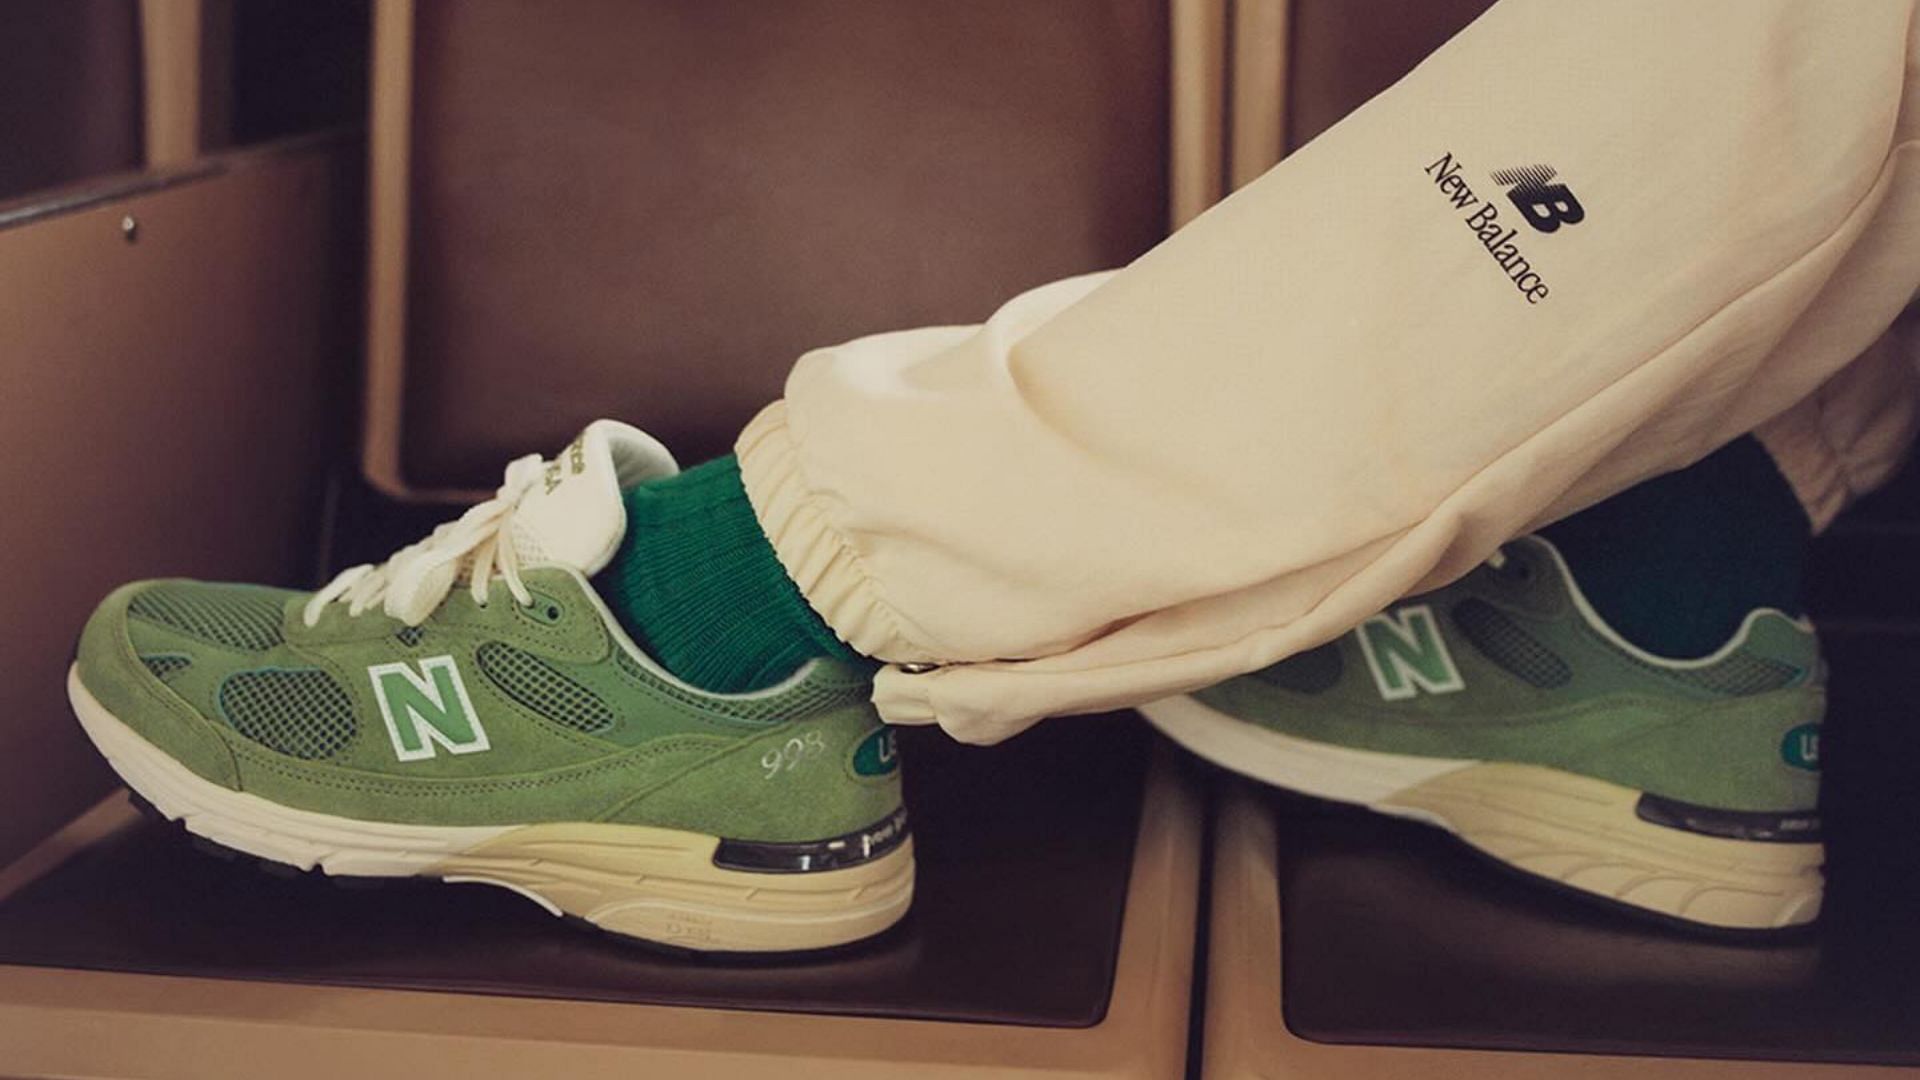 New Balance 993 “Chive” shoes: Features explored